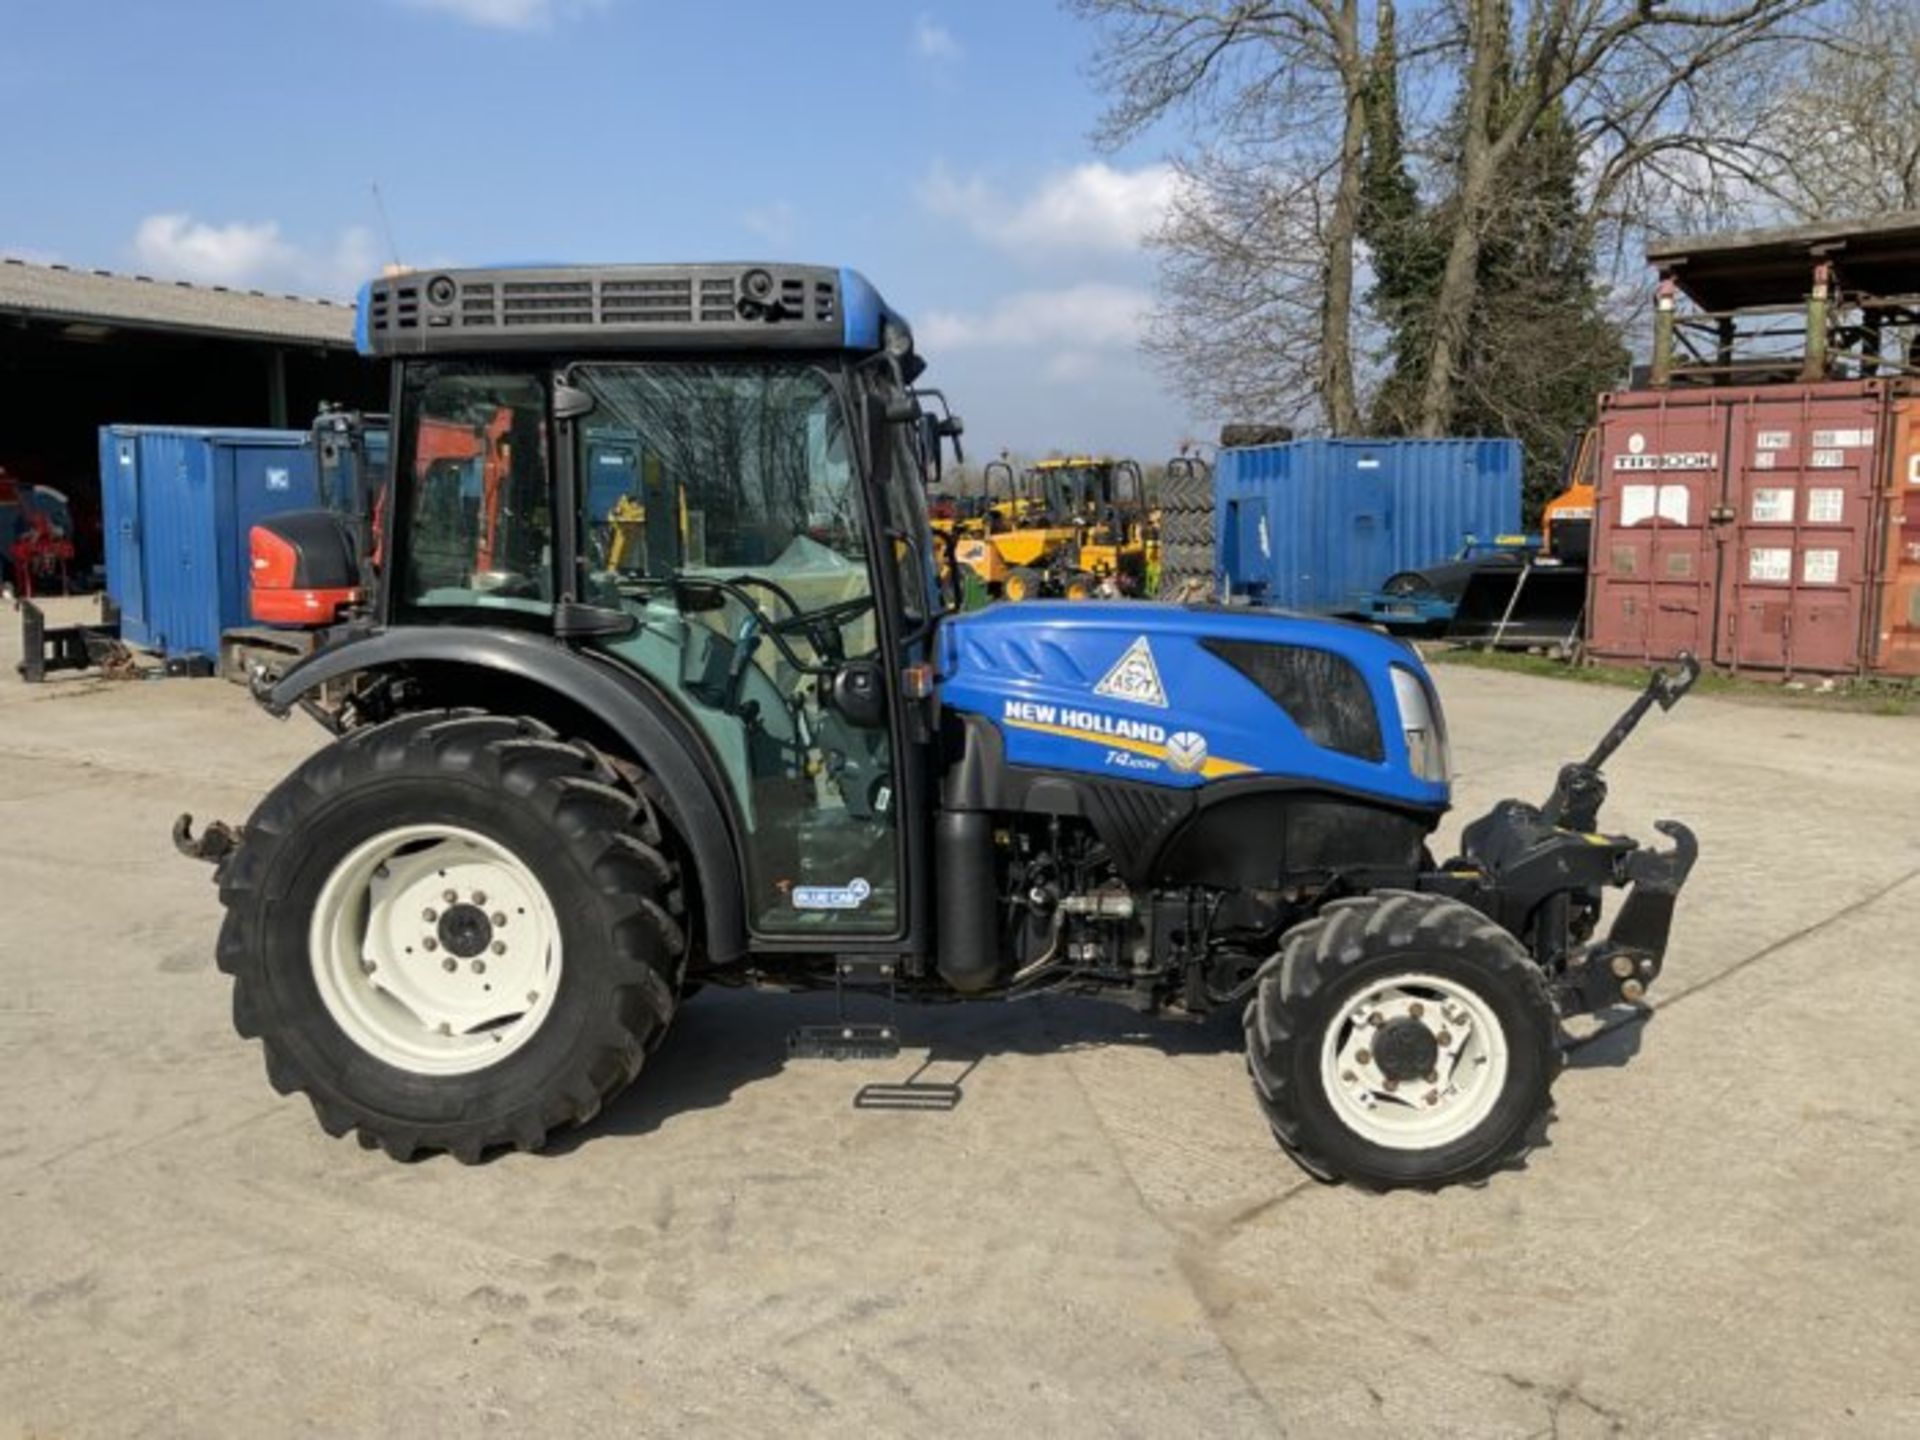 YEAR 2018 NEW HOLLAND T4.100N. FRONT LINKAGE. FRONT P.T.O. SUPER STEER. 3 SPOOLS. AIR CON - Bild 5 aus 11